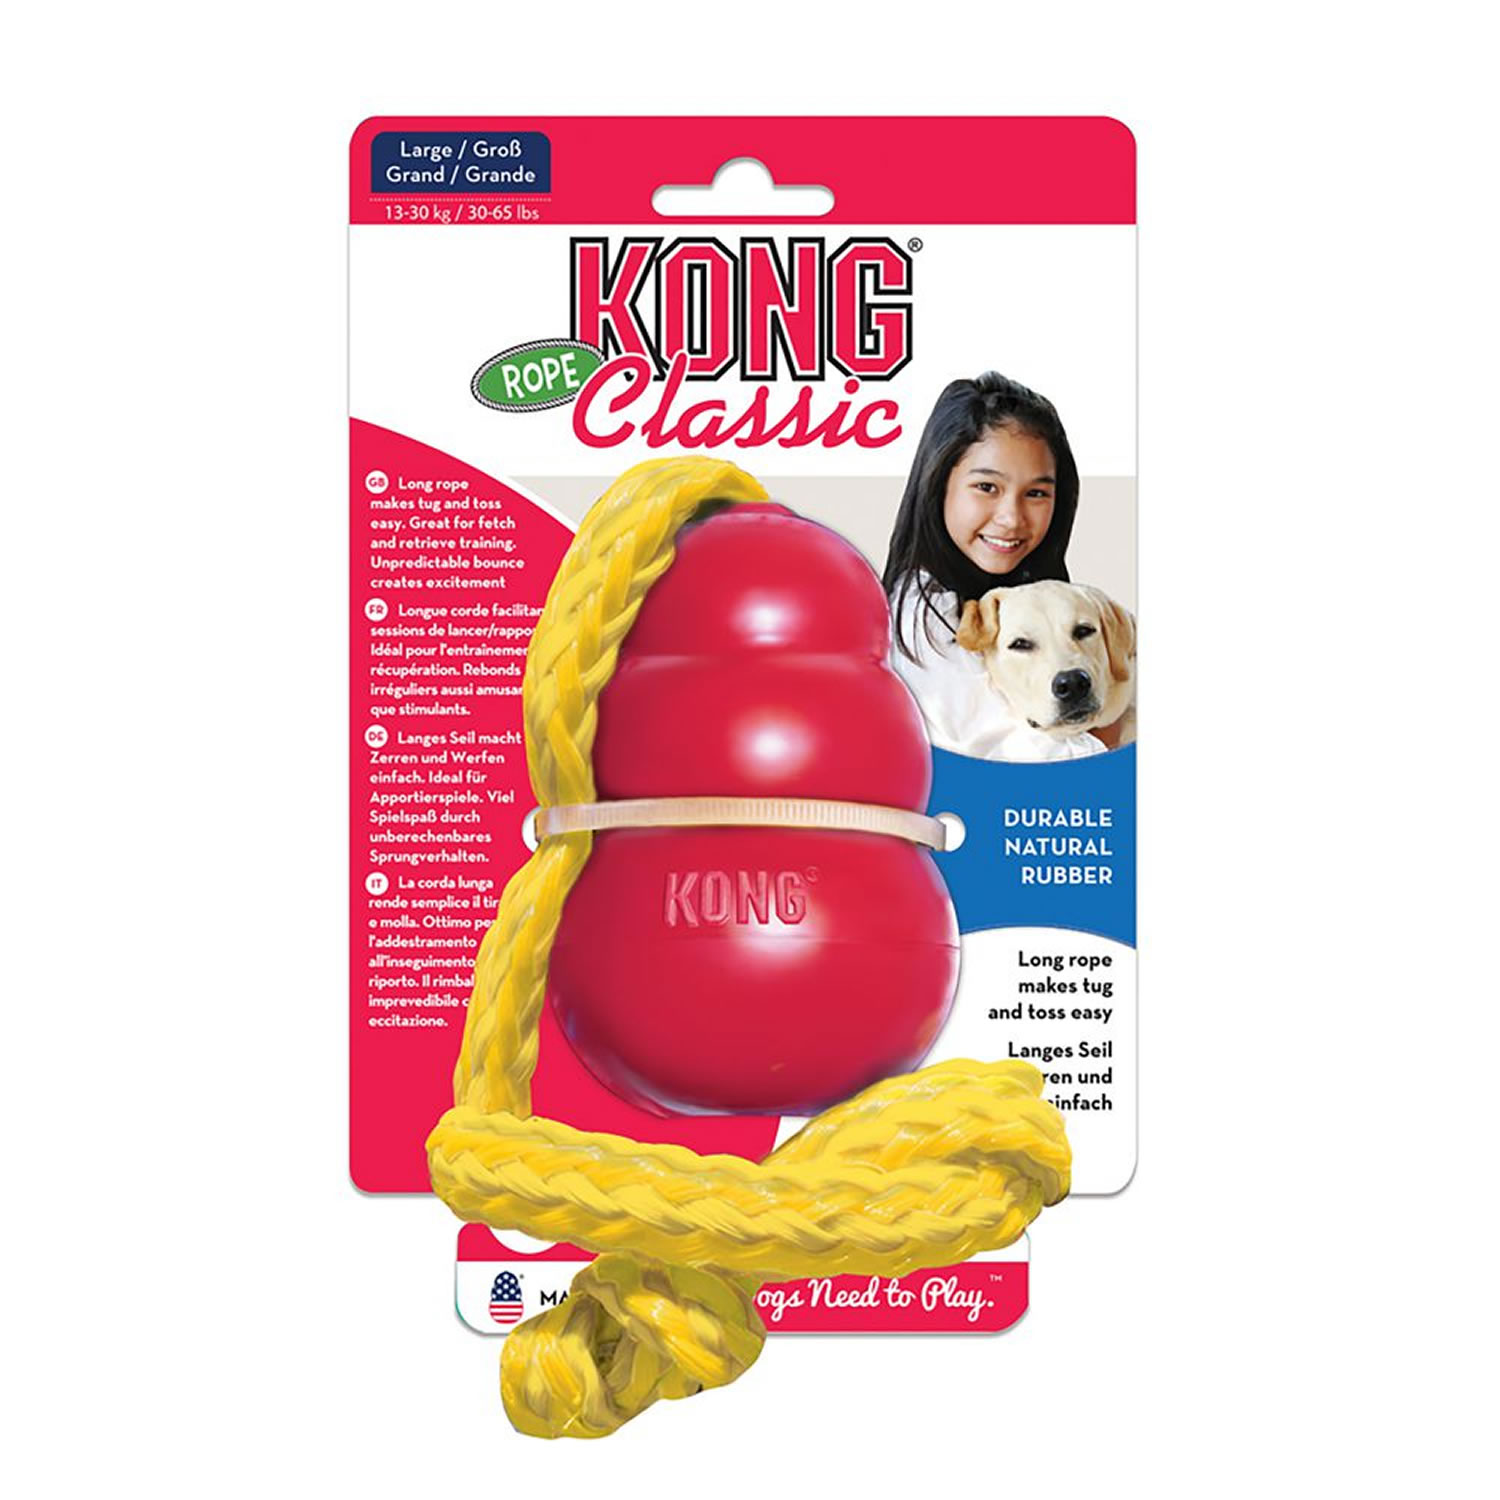 KONG CLASSIC WITH ROPE LARGE